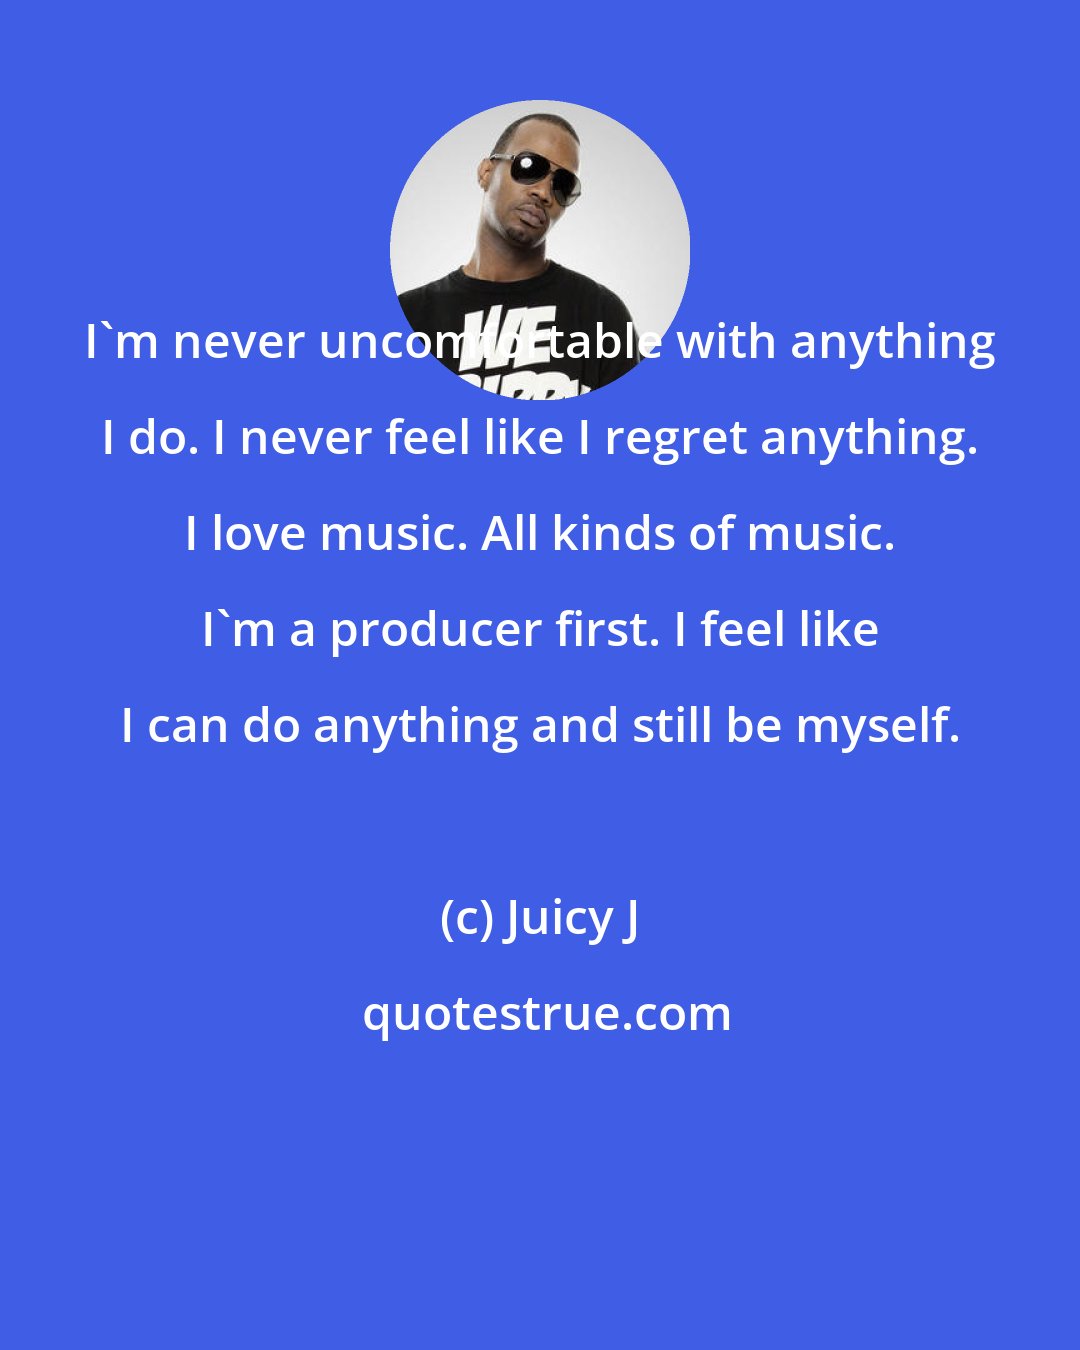 Juicy J: I'm never uncomfortable with anything I do. I never feel like I regret anything. I love music. All kinds of music. I'm a producer first. I feel like I can do anything and still be myself.